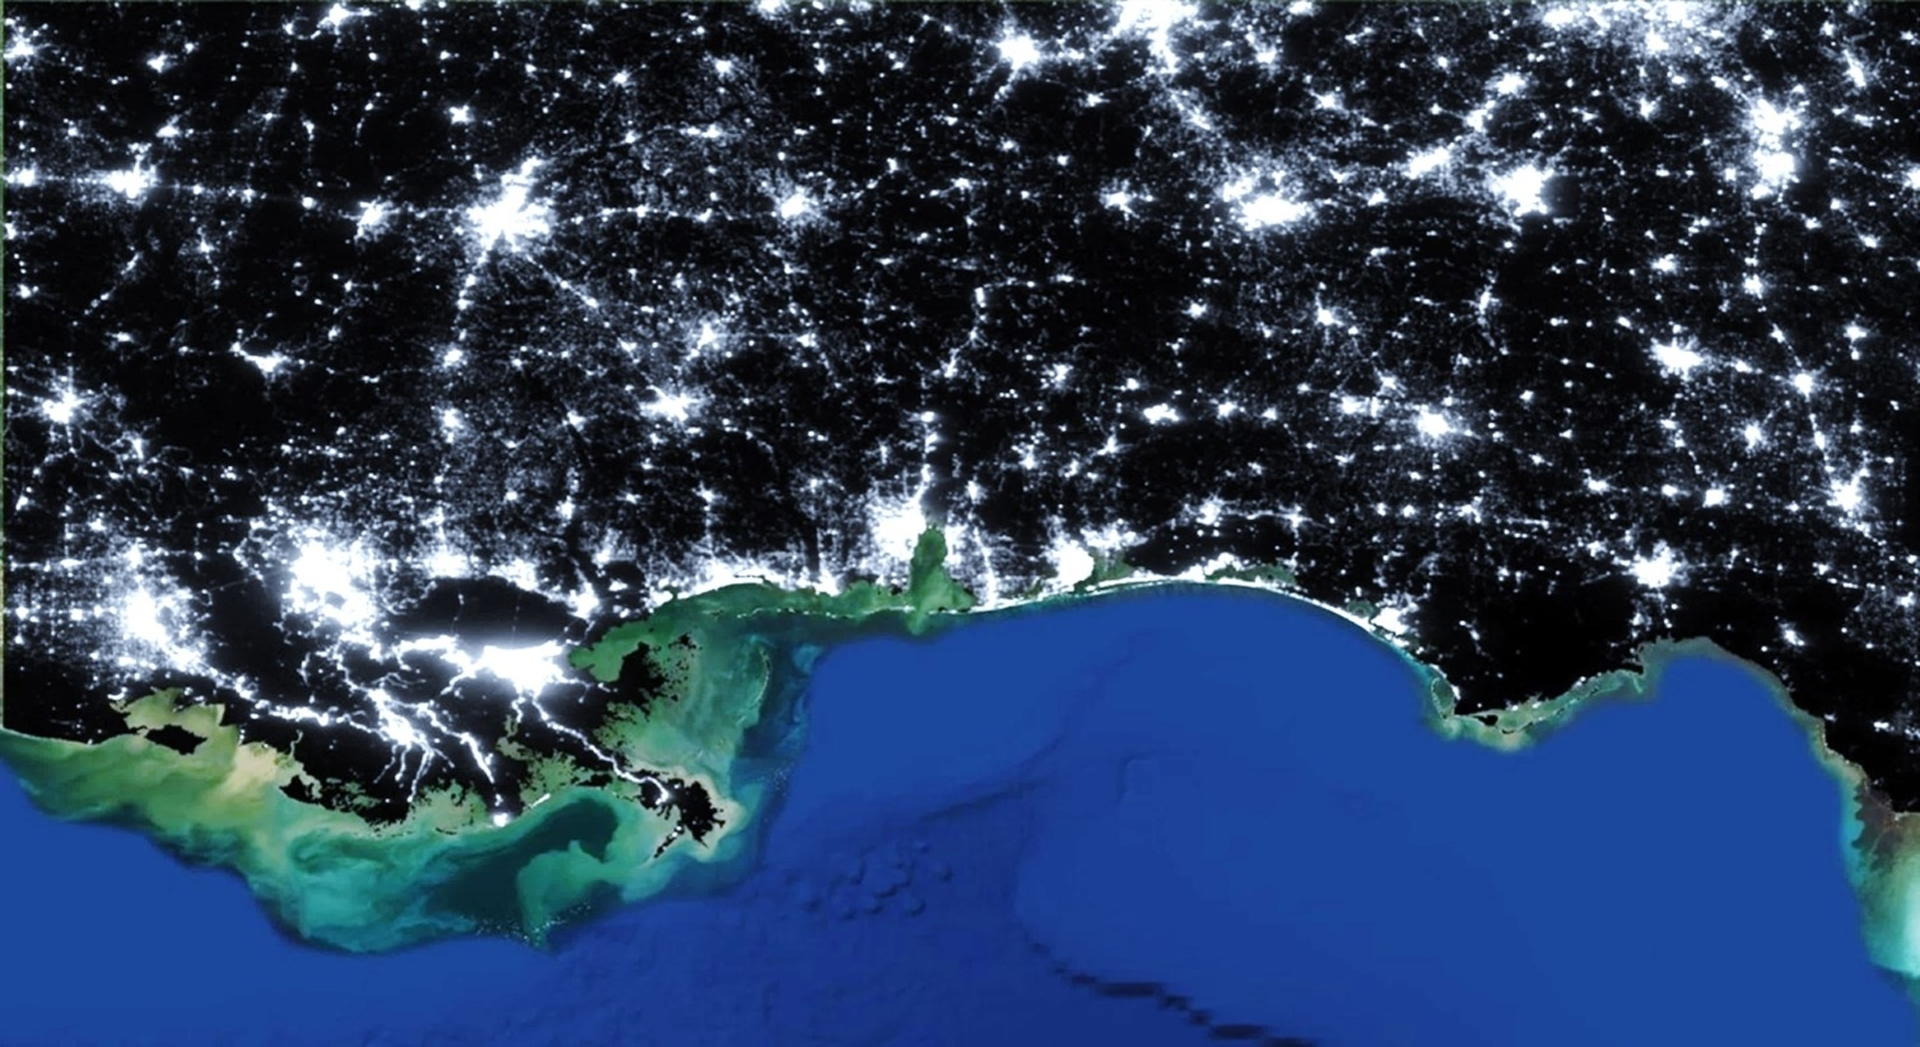 The Skyglow Estimation Toolbox (SET) generates light pollution maps based on Suomi NPP VIIRS Day/Night Band imagery from NCEI’s Earth Observation Group (2014 to 2018). This image captures the skyglow around Gulf Island National Seashore. Lighter areas indicate regions where local stakeholders should implement light pollution reduction measures. SET allows park managers to use NPP VIIRS to estimate skyglow from any location, which in turn informs light pollution management decisions for wildlife conservation and night sky viewing.